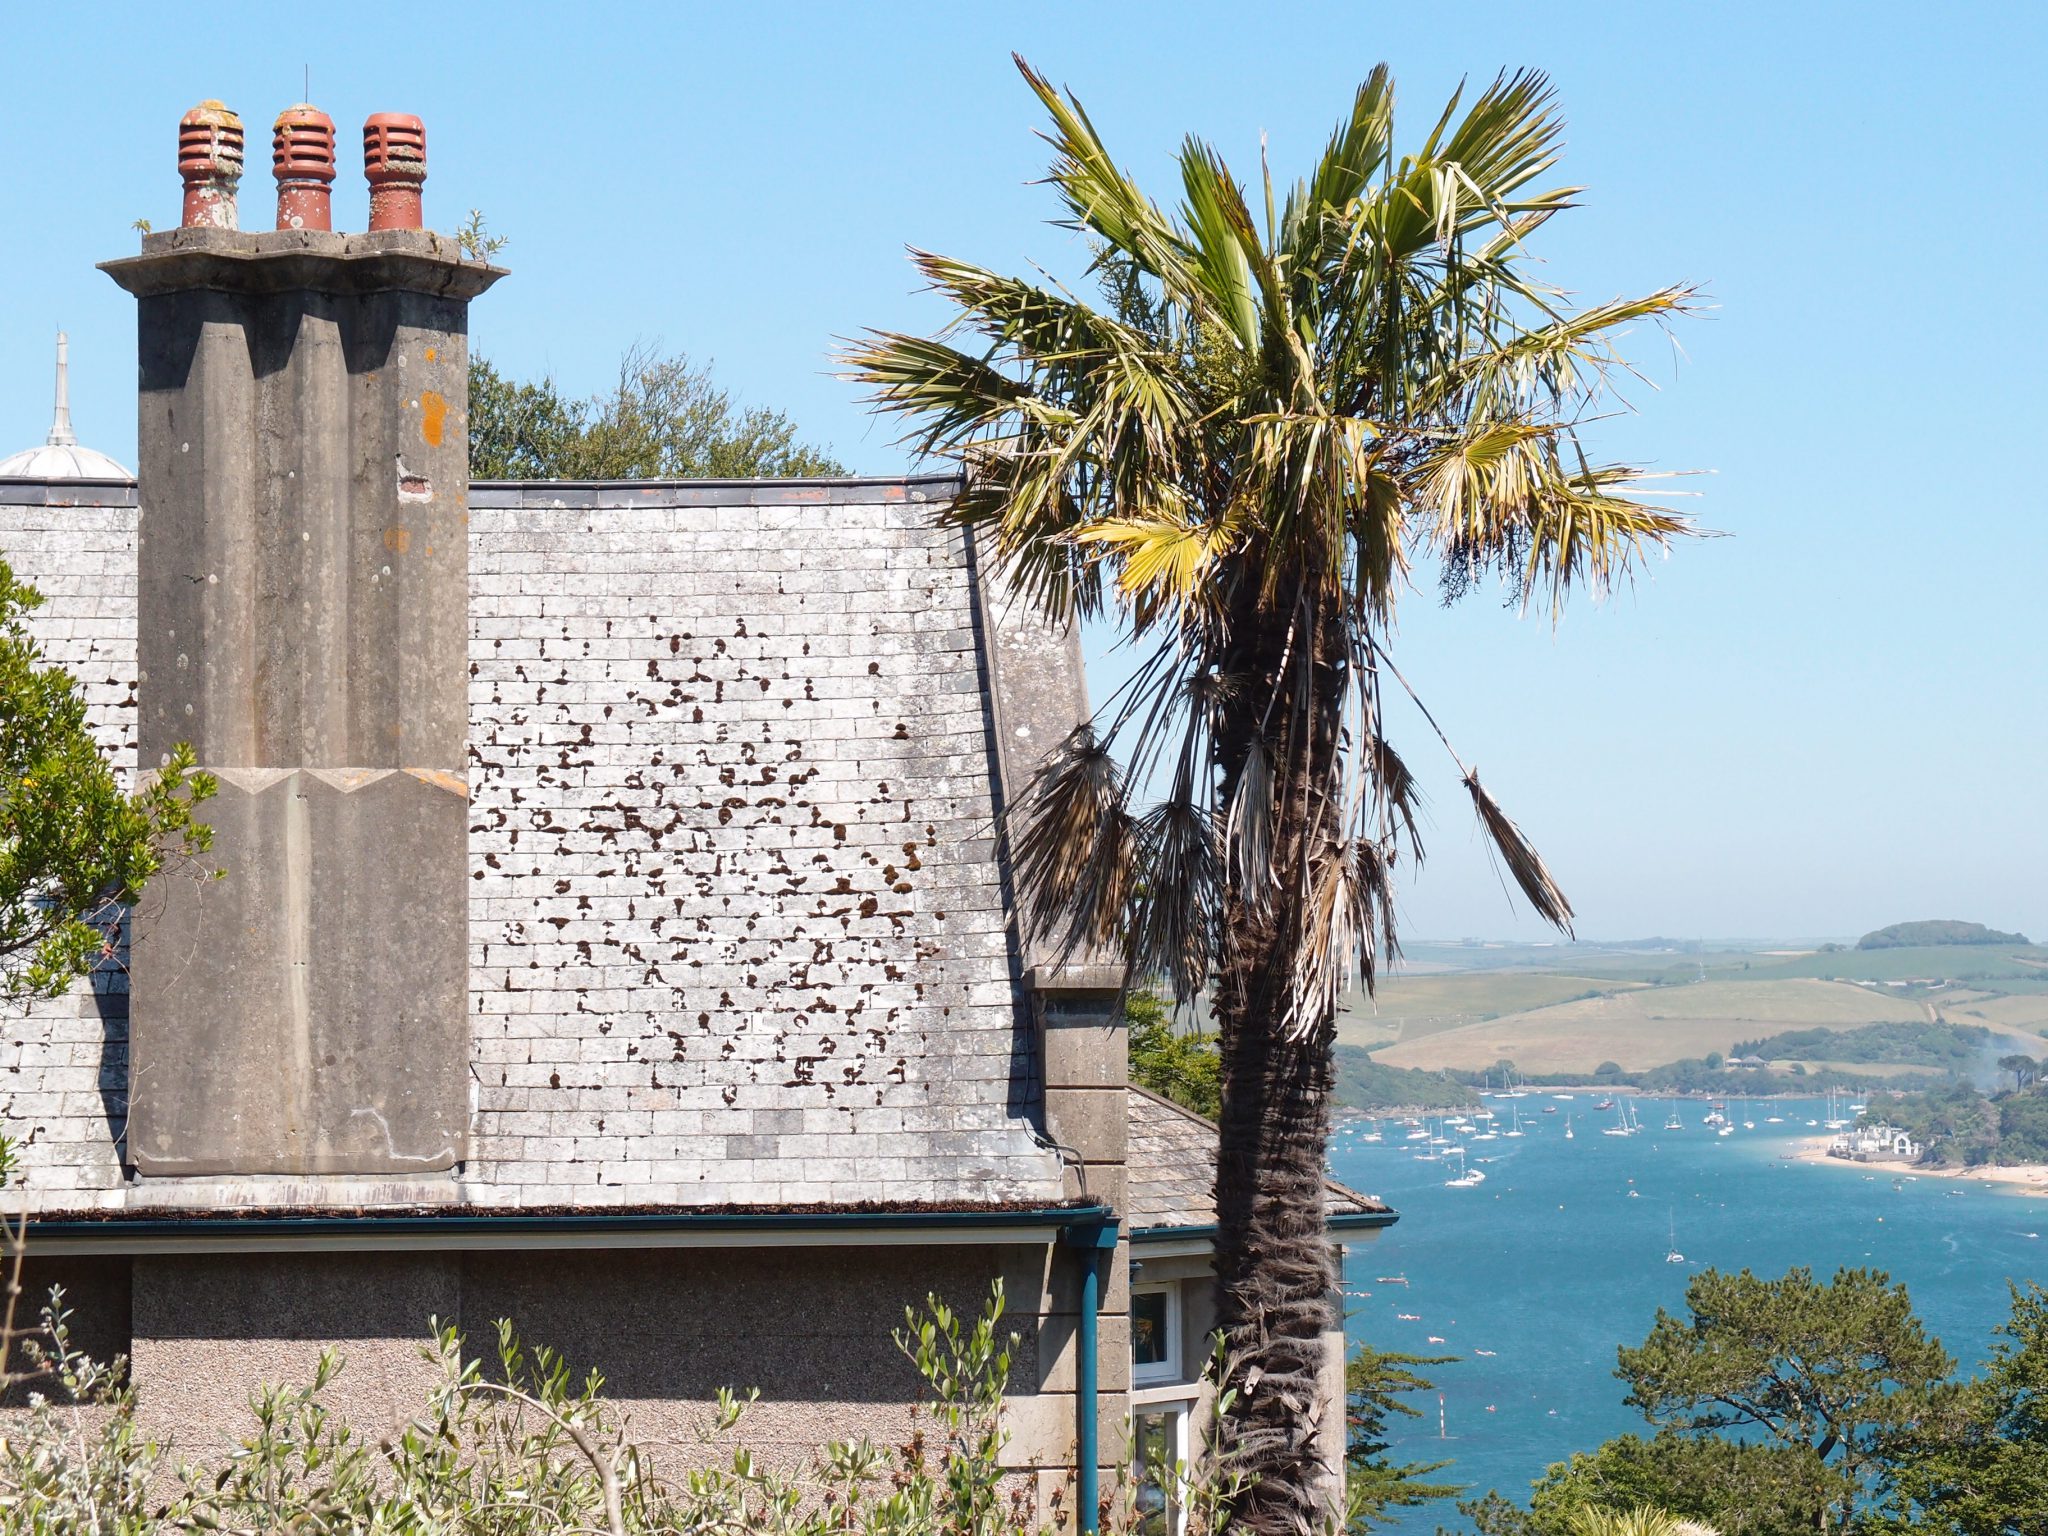 From the Gazebo Garden, we take a closer look at the House chimneys.